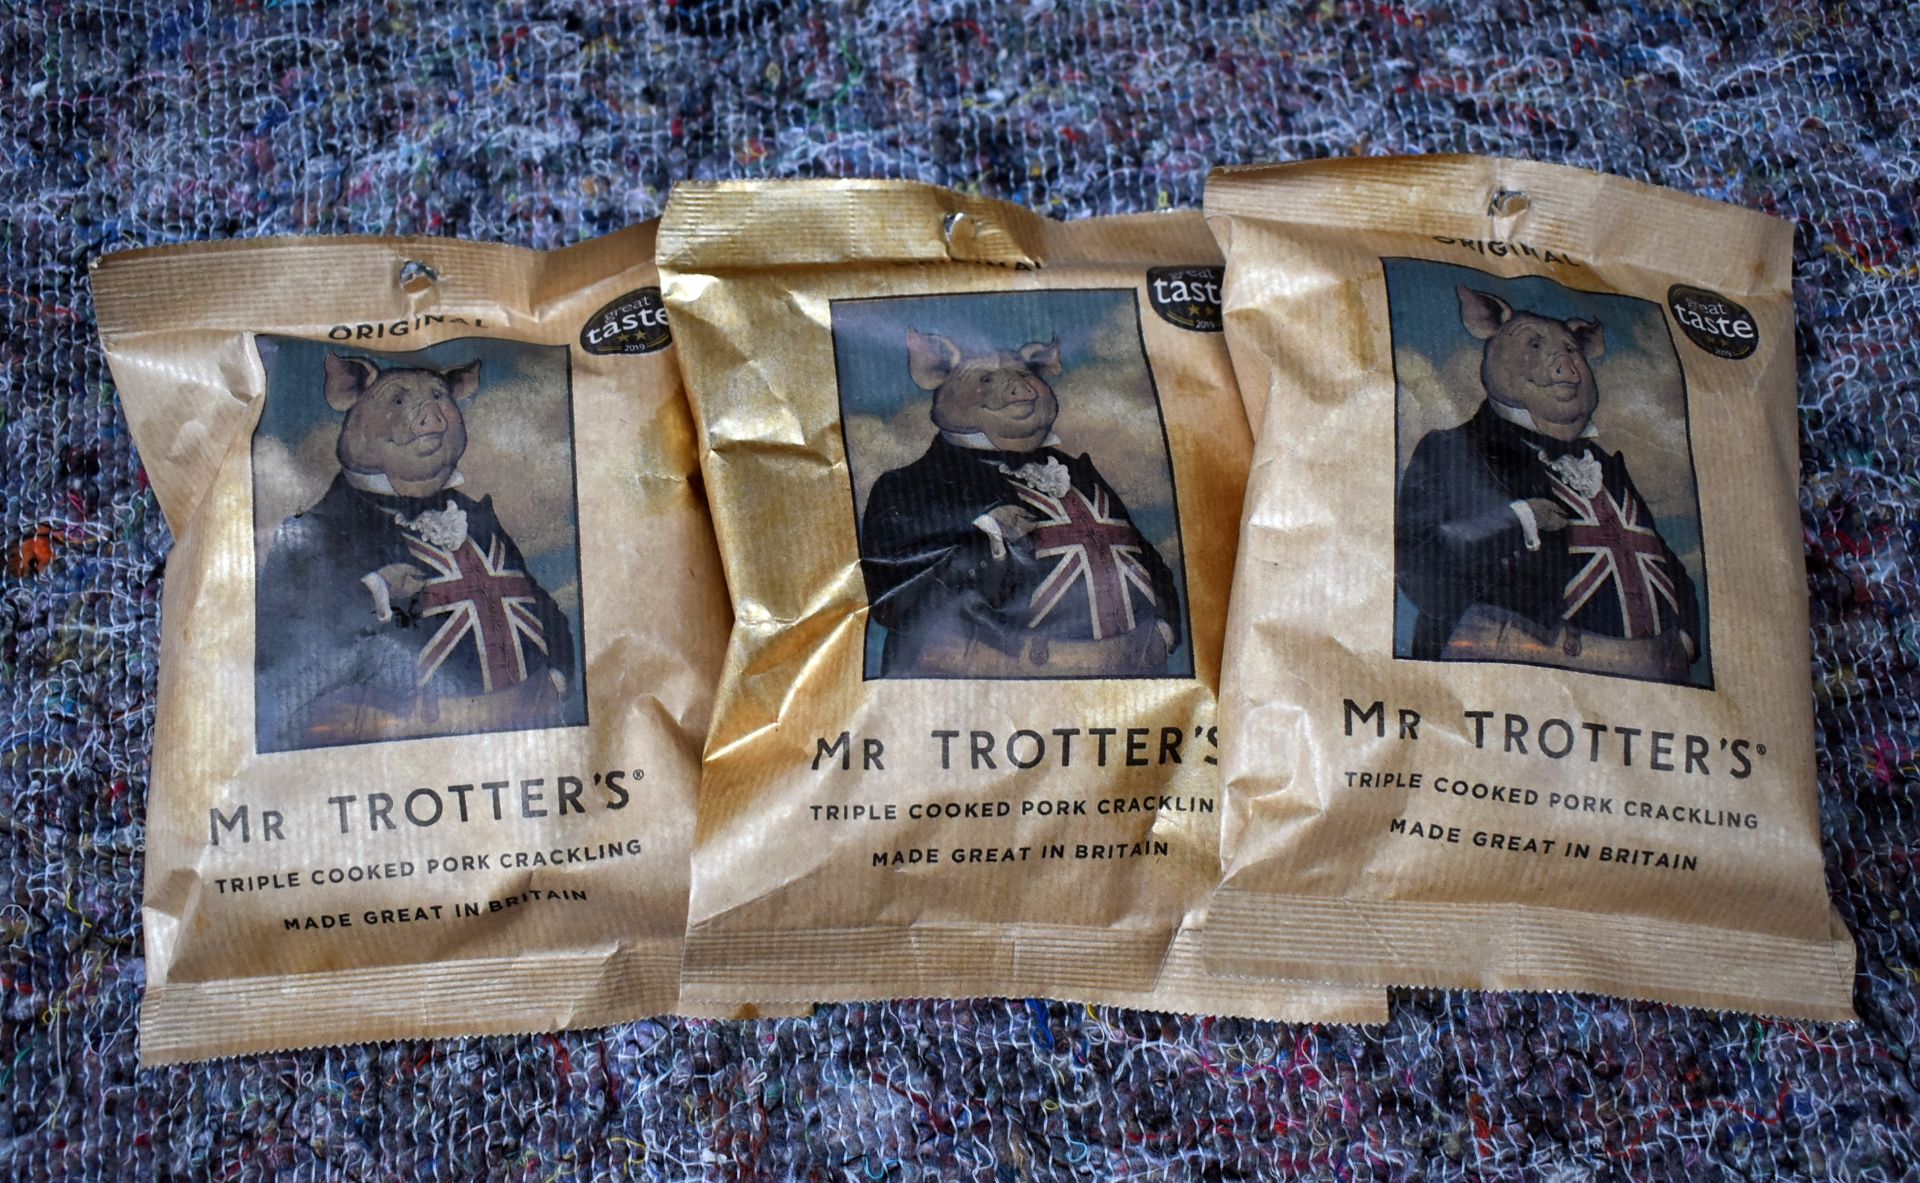 27 x Assorted Consumable Food Products Including JUST Flavoured Crisps and Mr. Trotters Crisps - Image 9 of 14